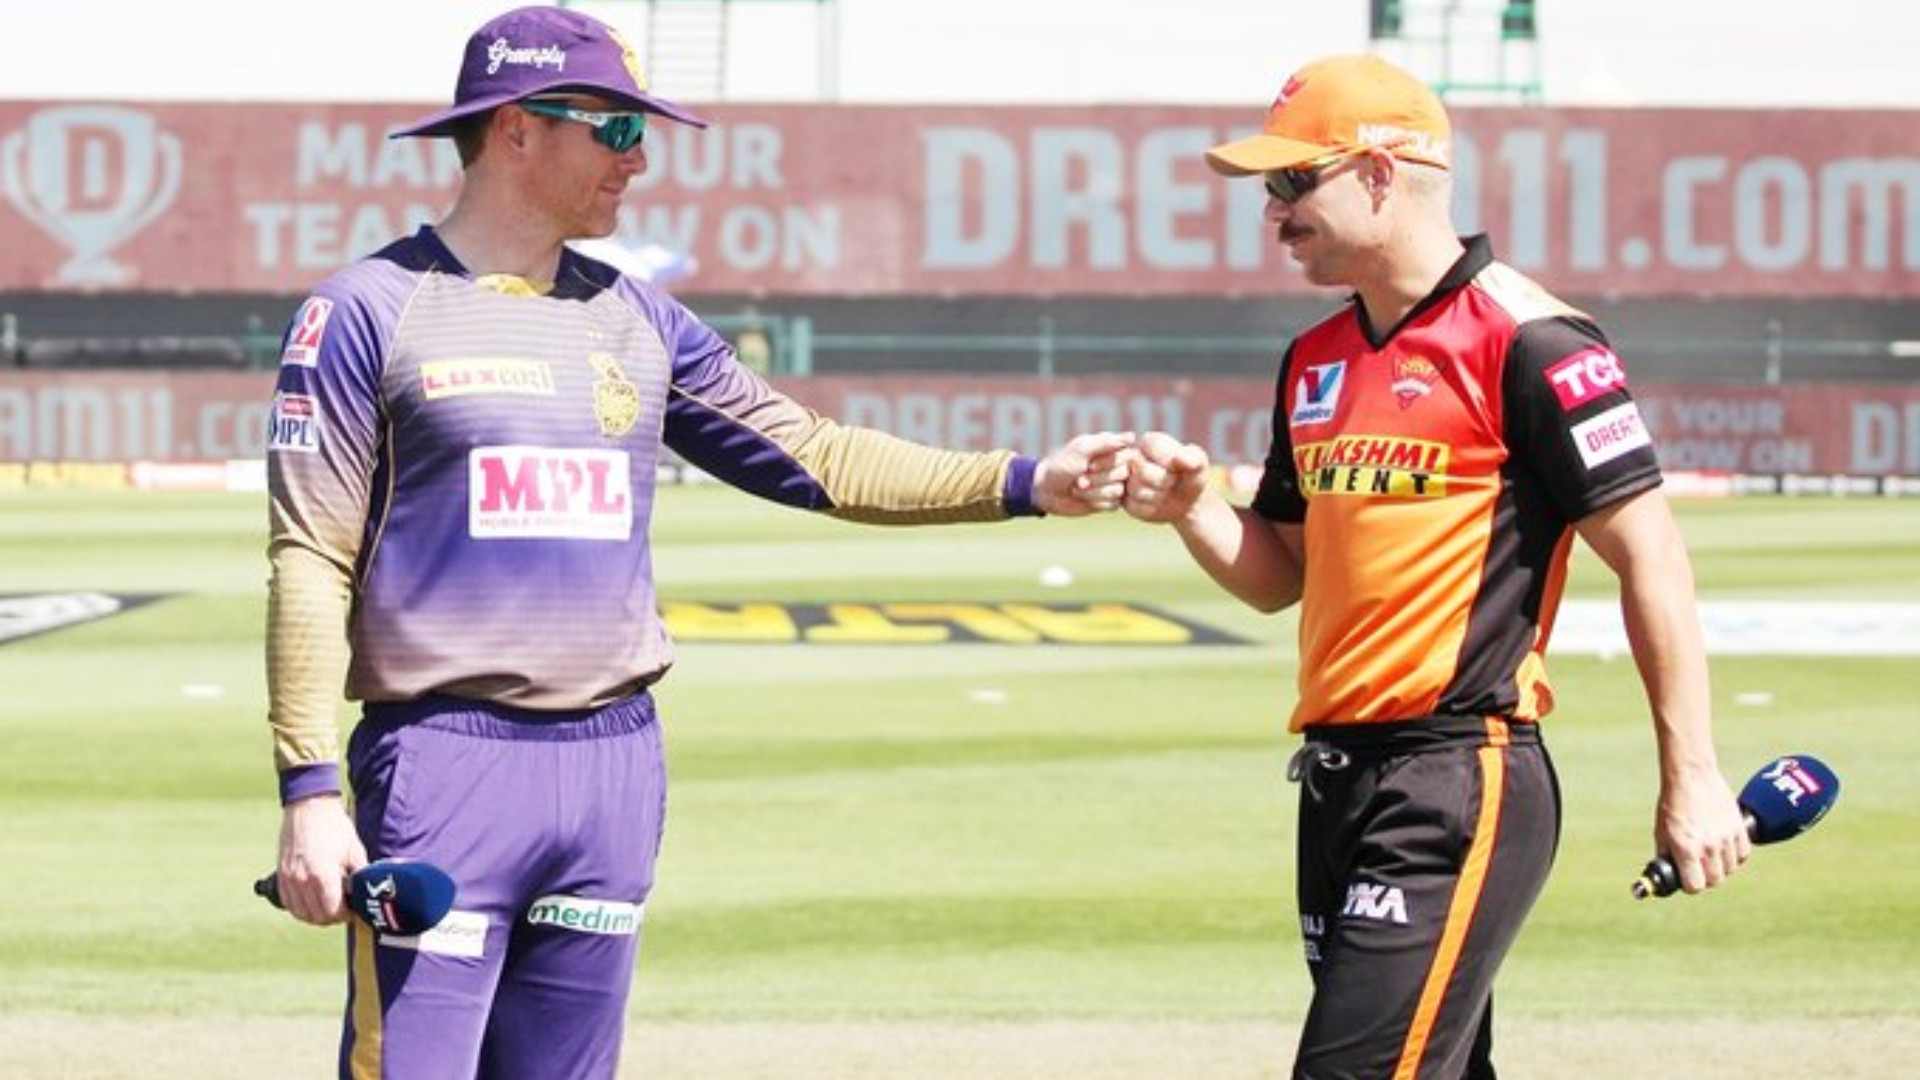 Eoin Morgan and David Warner in a file photo. (Image credit: Twitter)